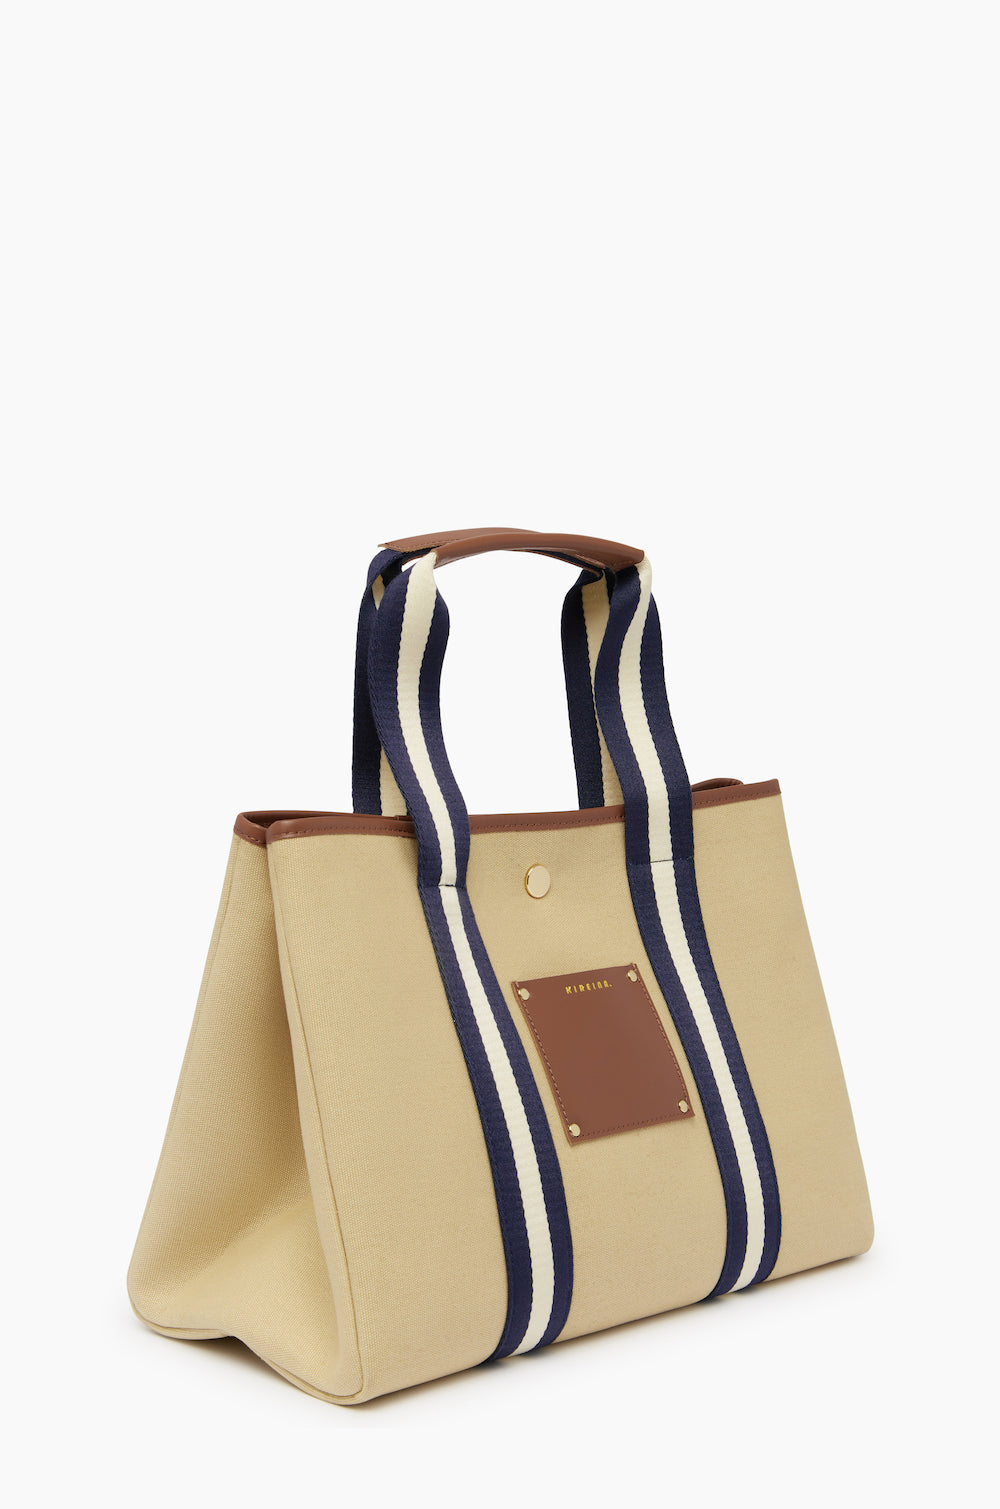 Canvas Tote Bags, French Handbags